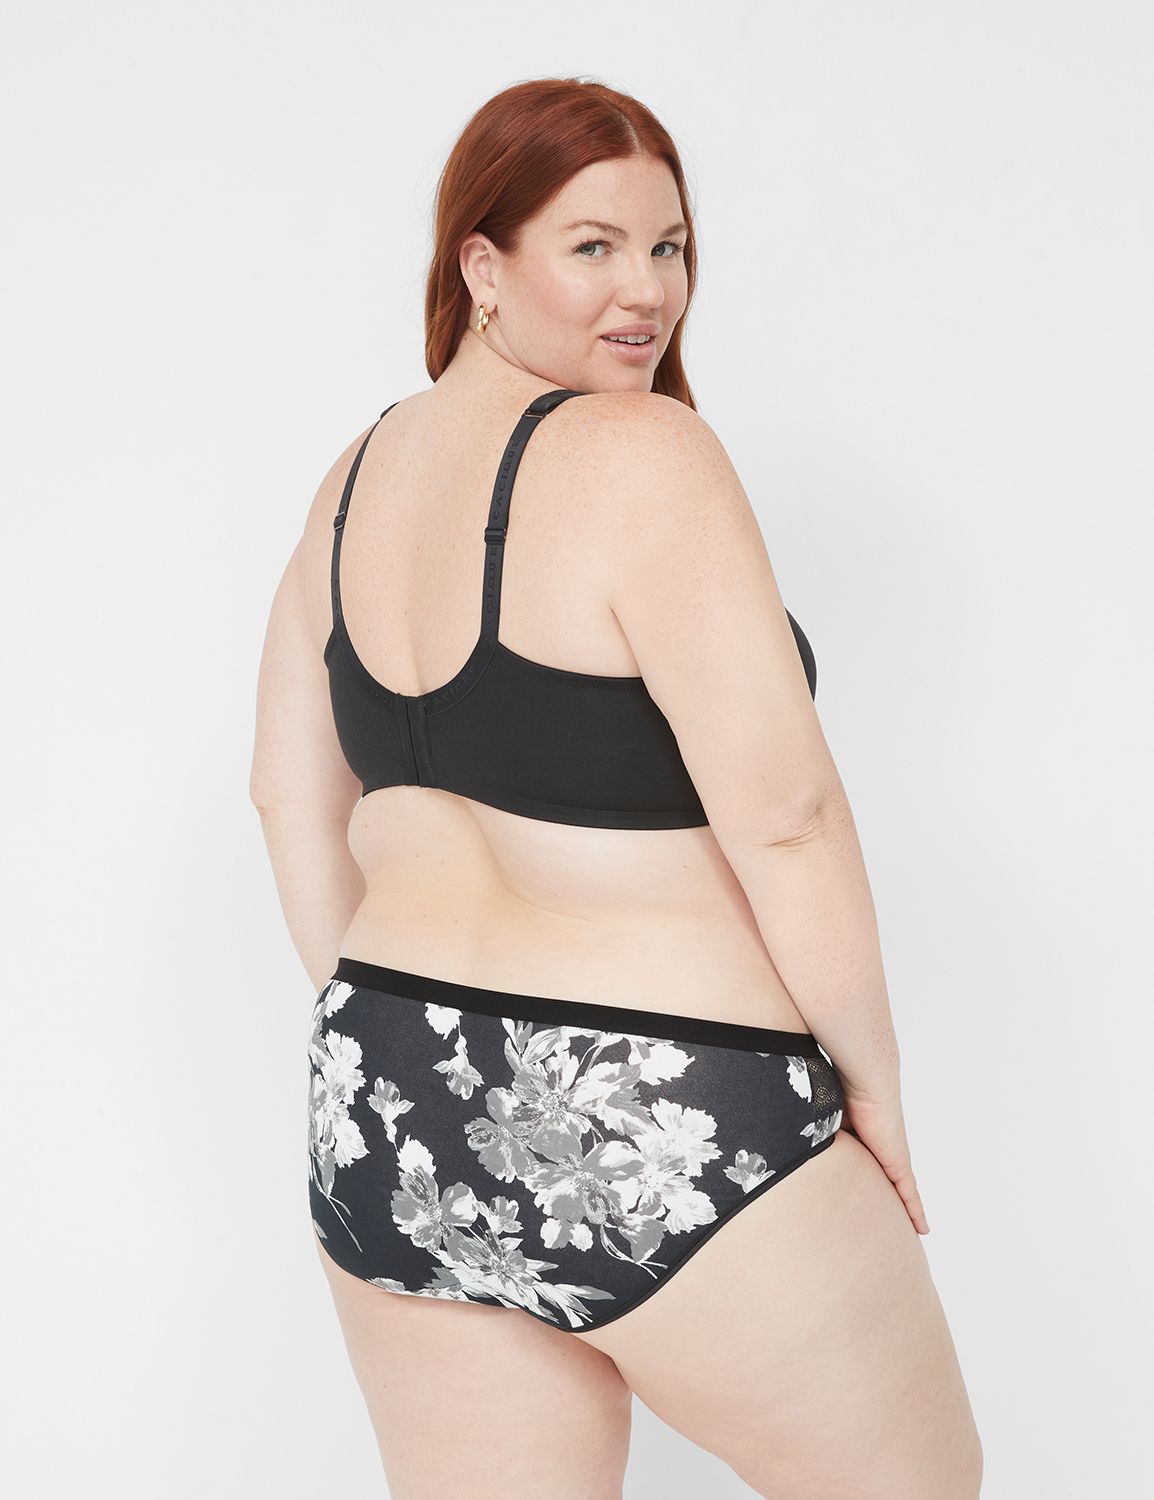 Lane Bryant - This holiday panty party just got merrier! 8 for $35 panties  is just begging for a top-drawer update. 😍 Shop